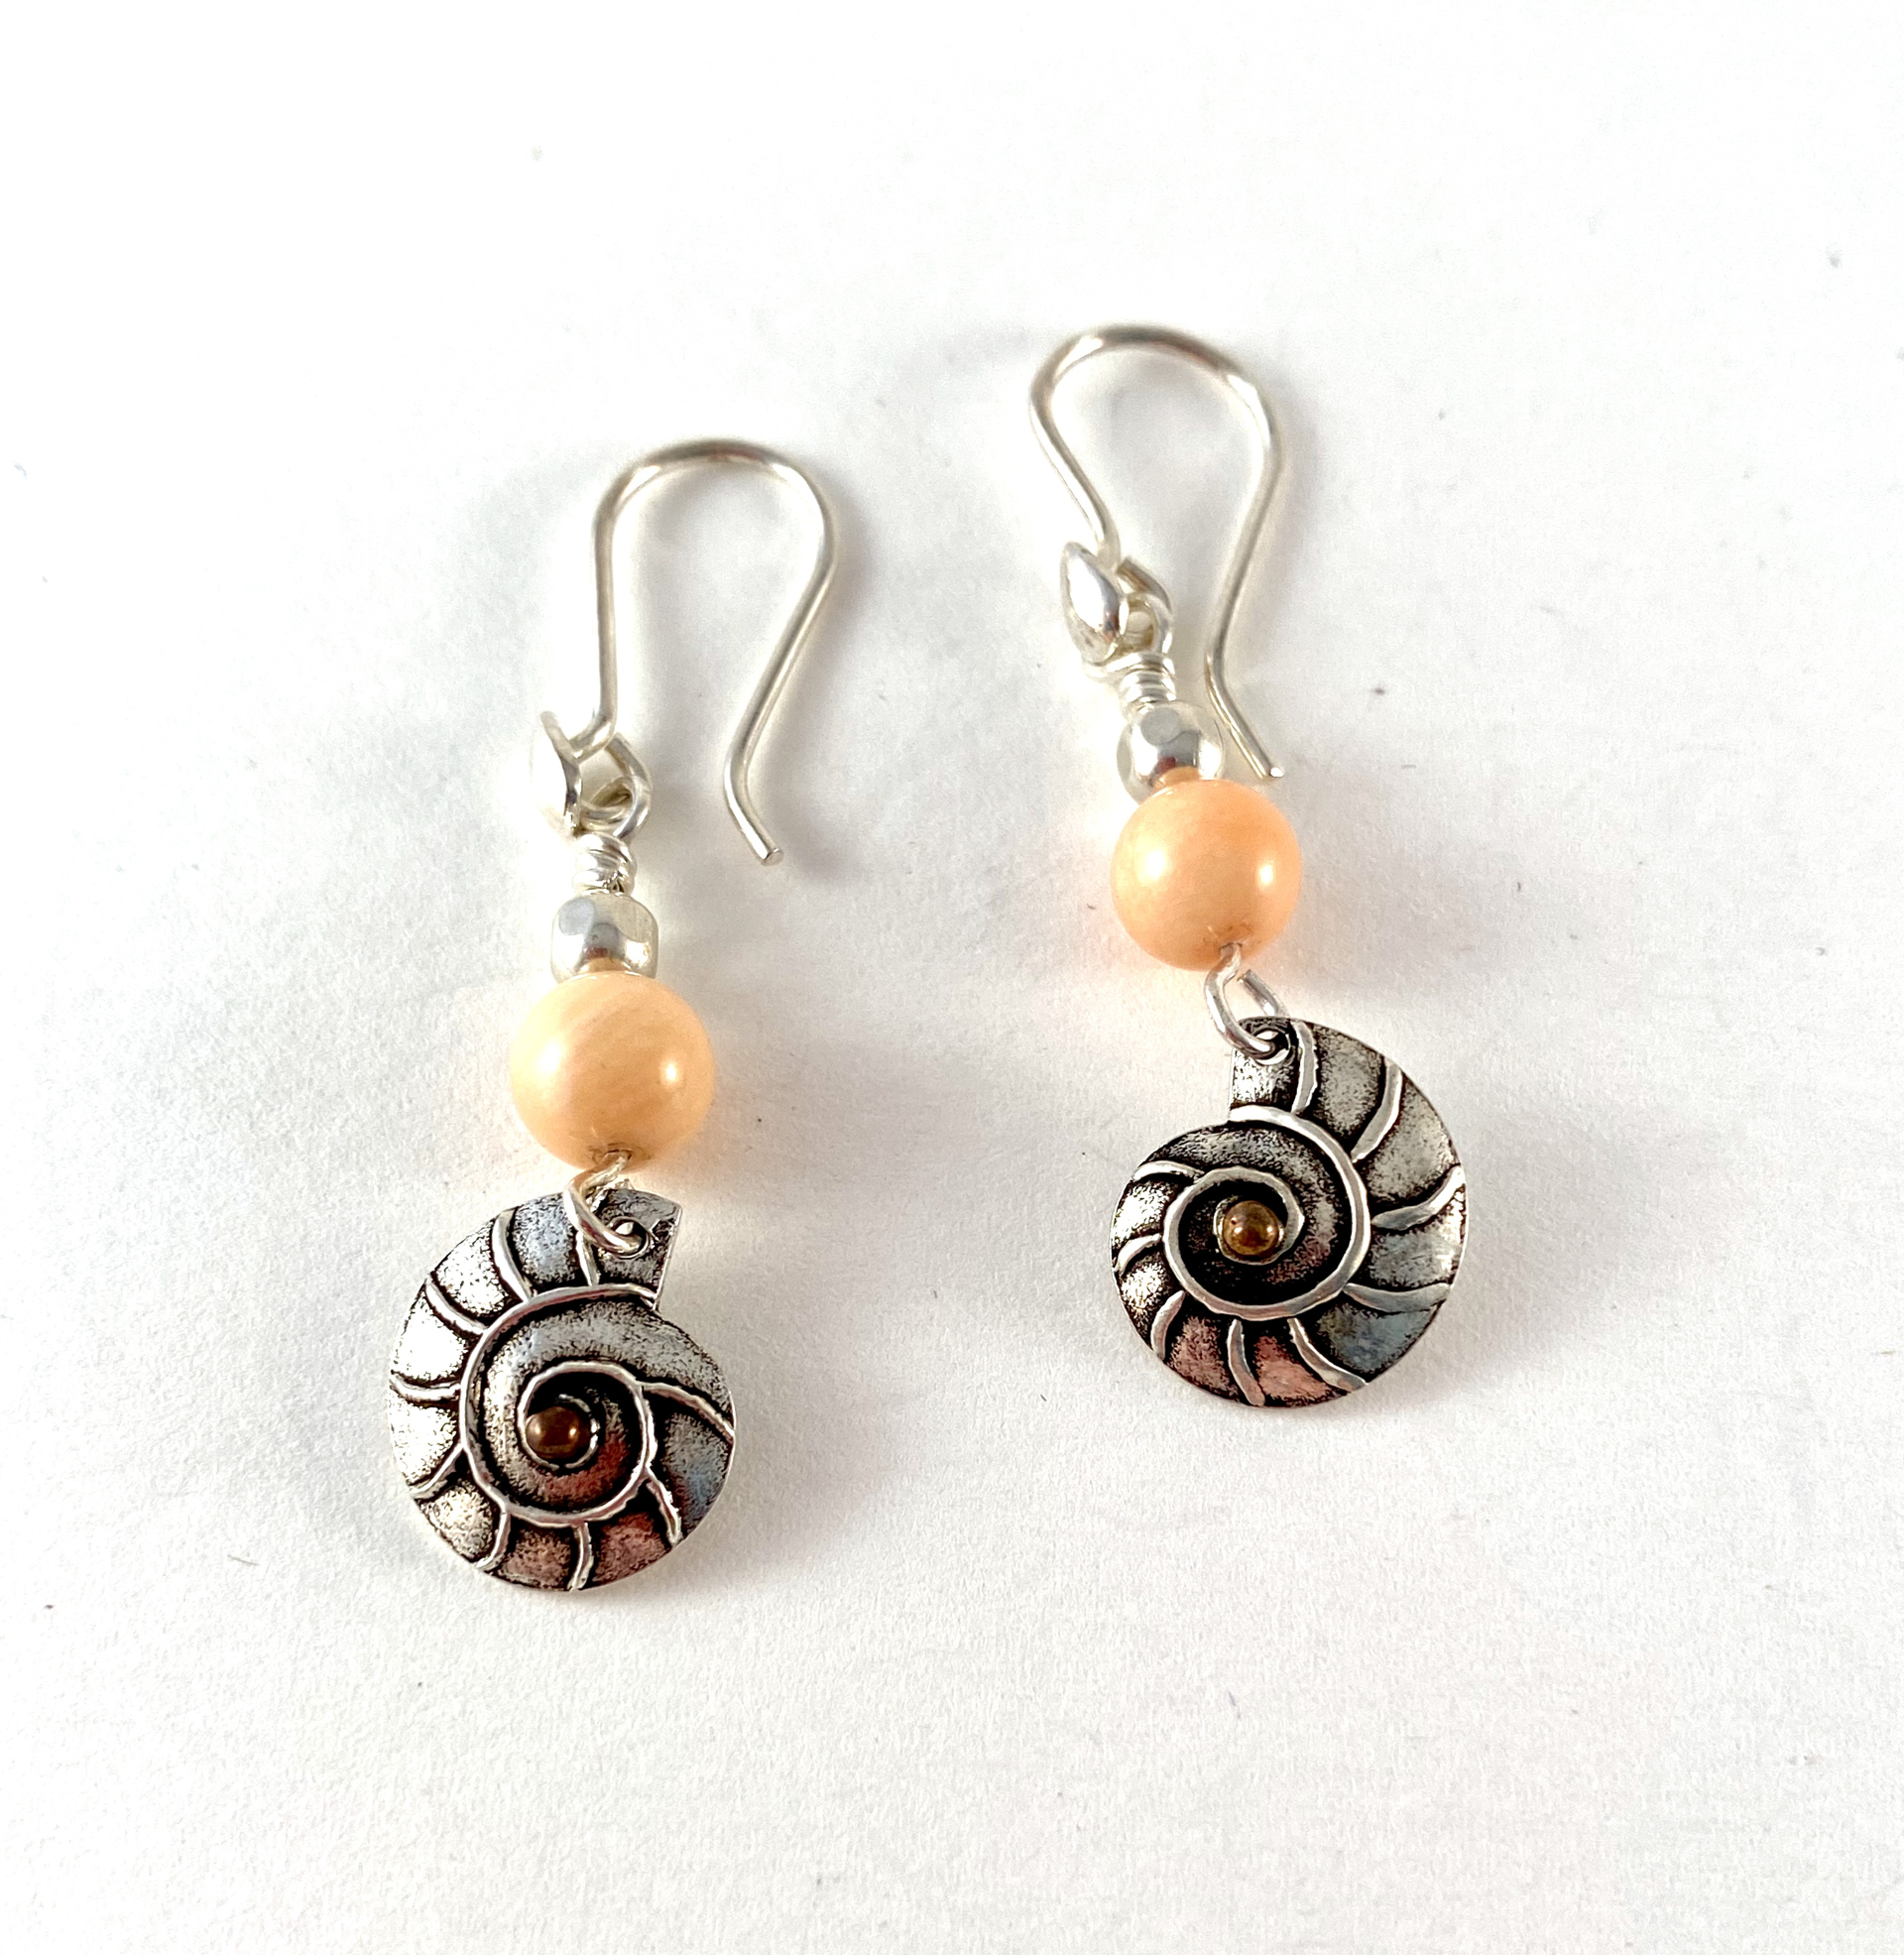 Silver Earrings with Coral Bead by Anne Bivens